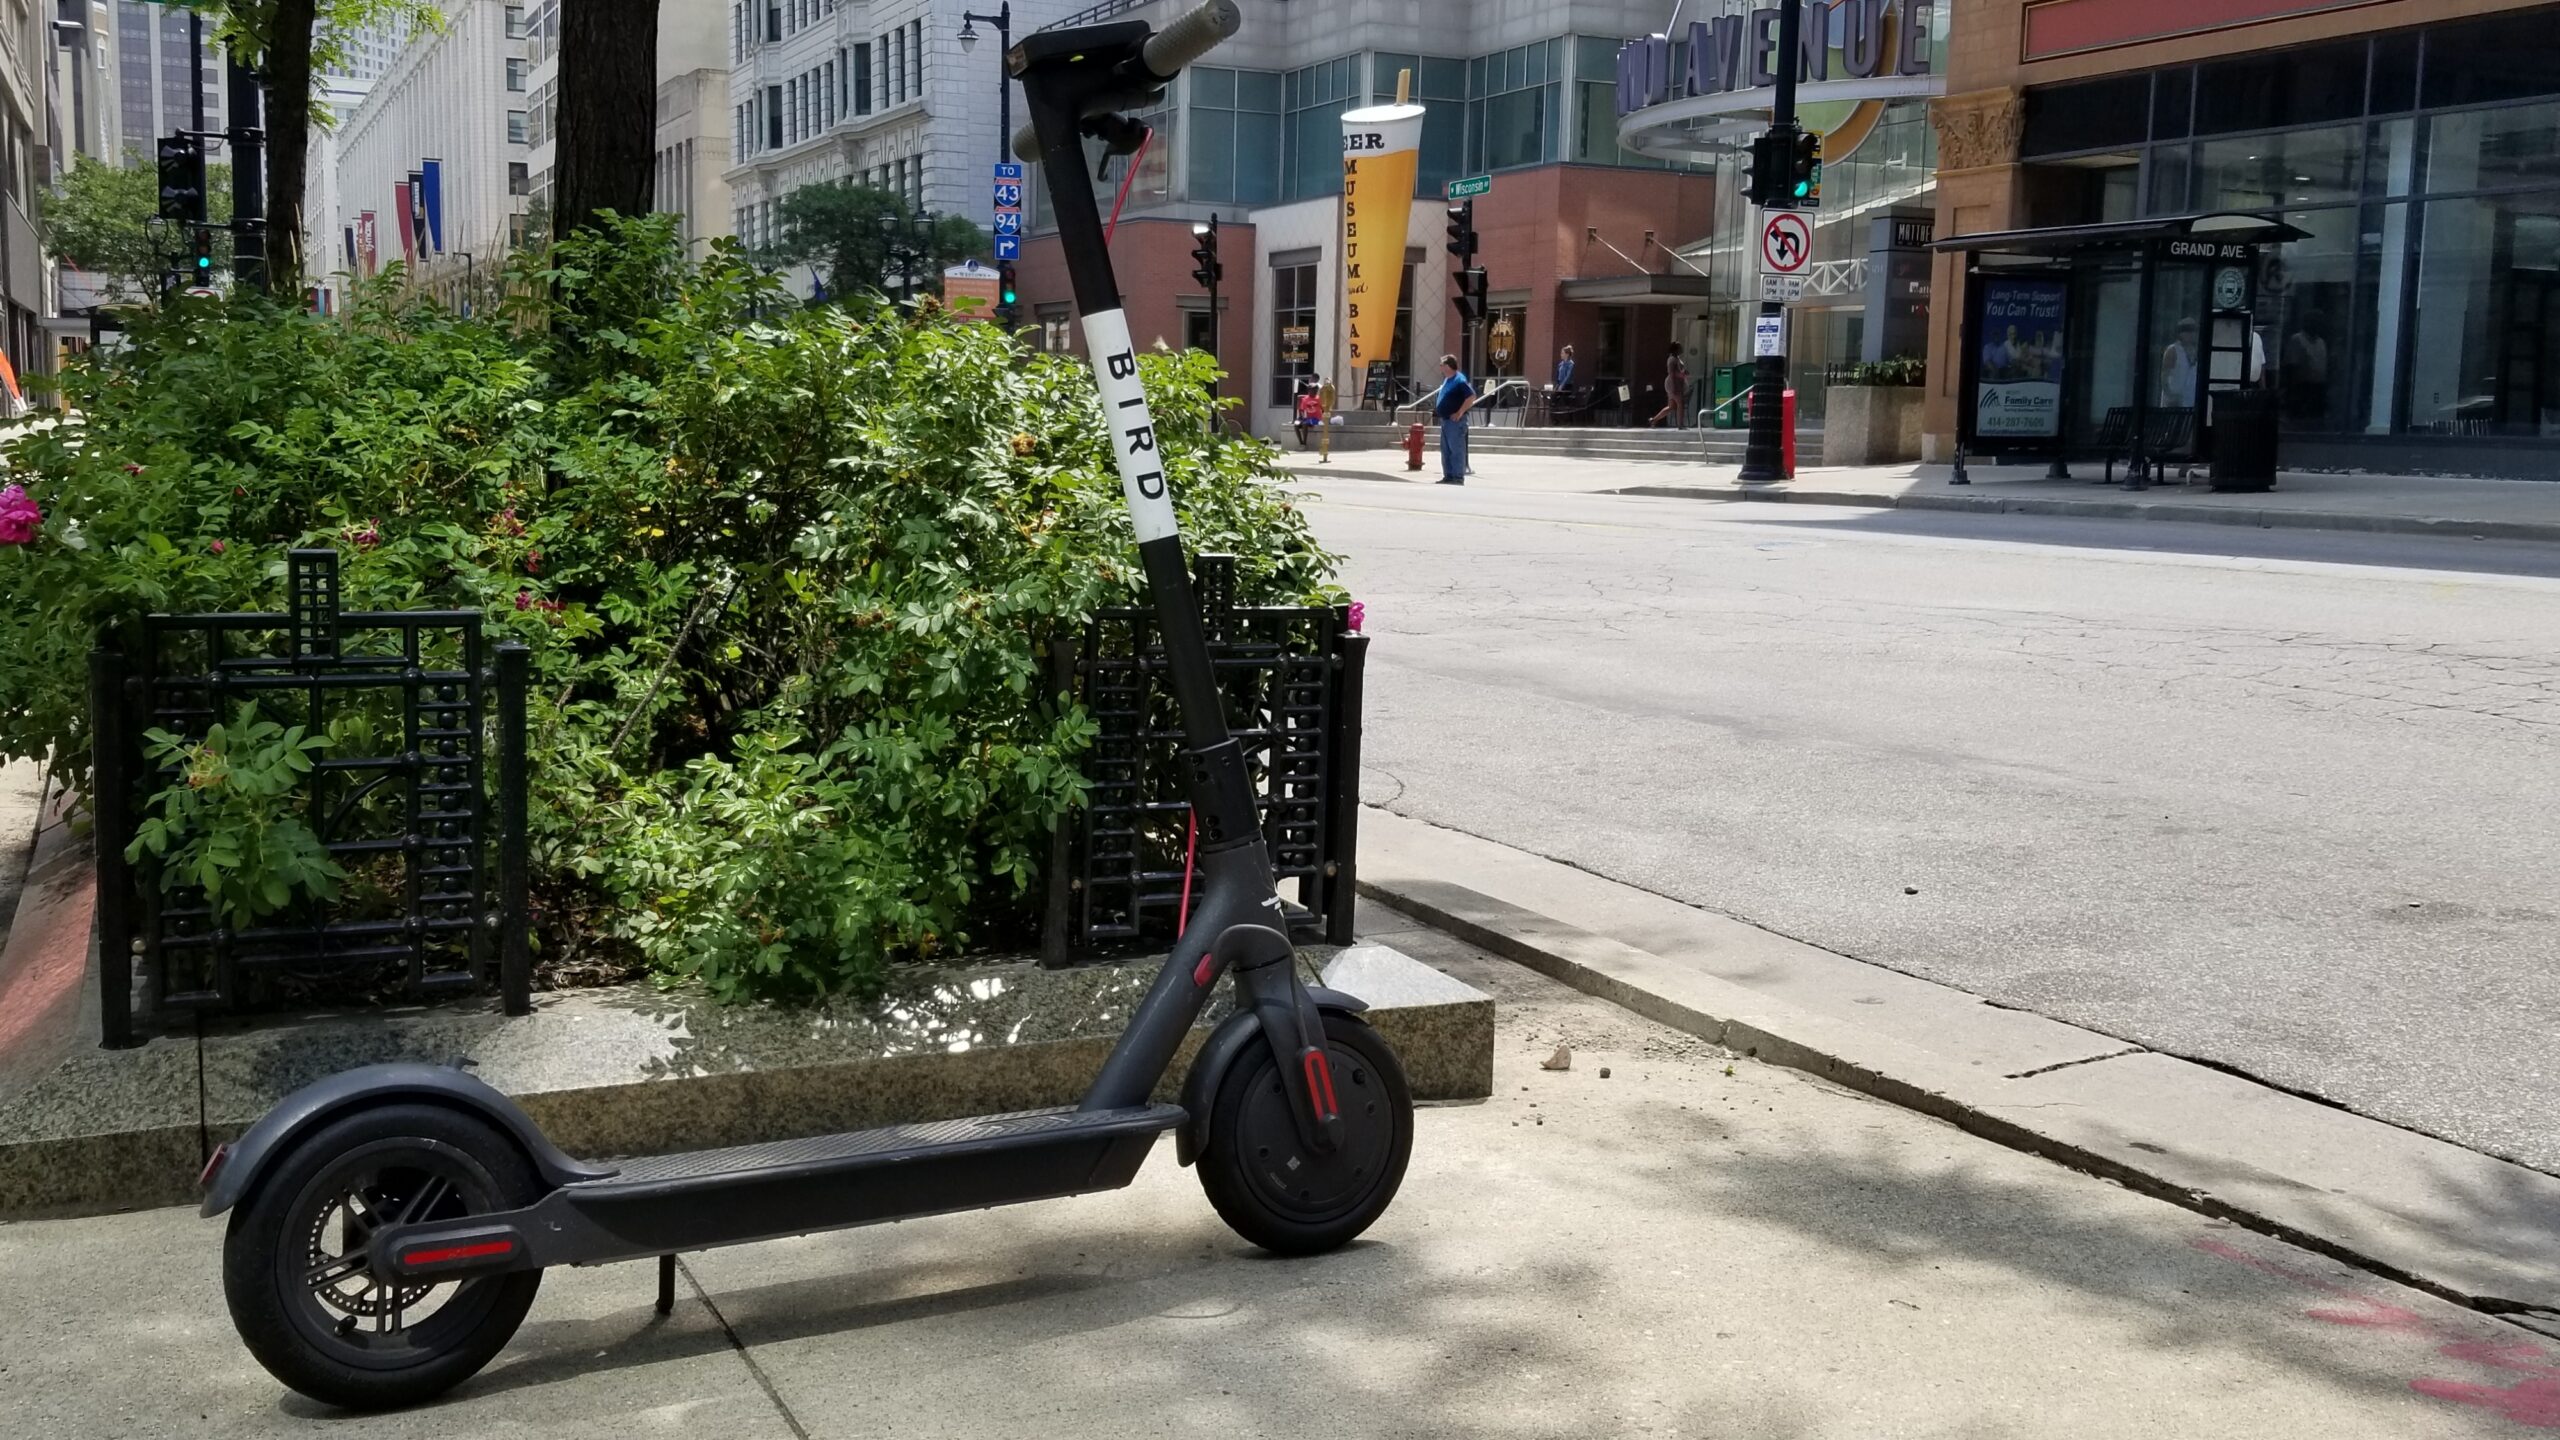 Bird Rides Inc. dockless electric scooter